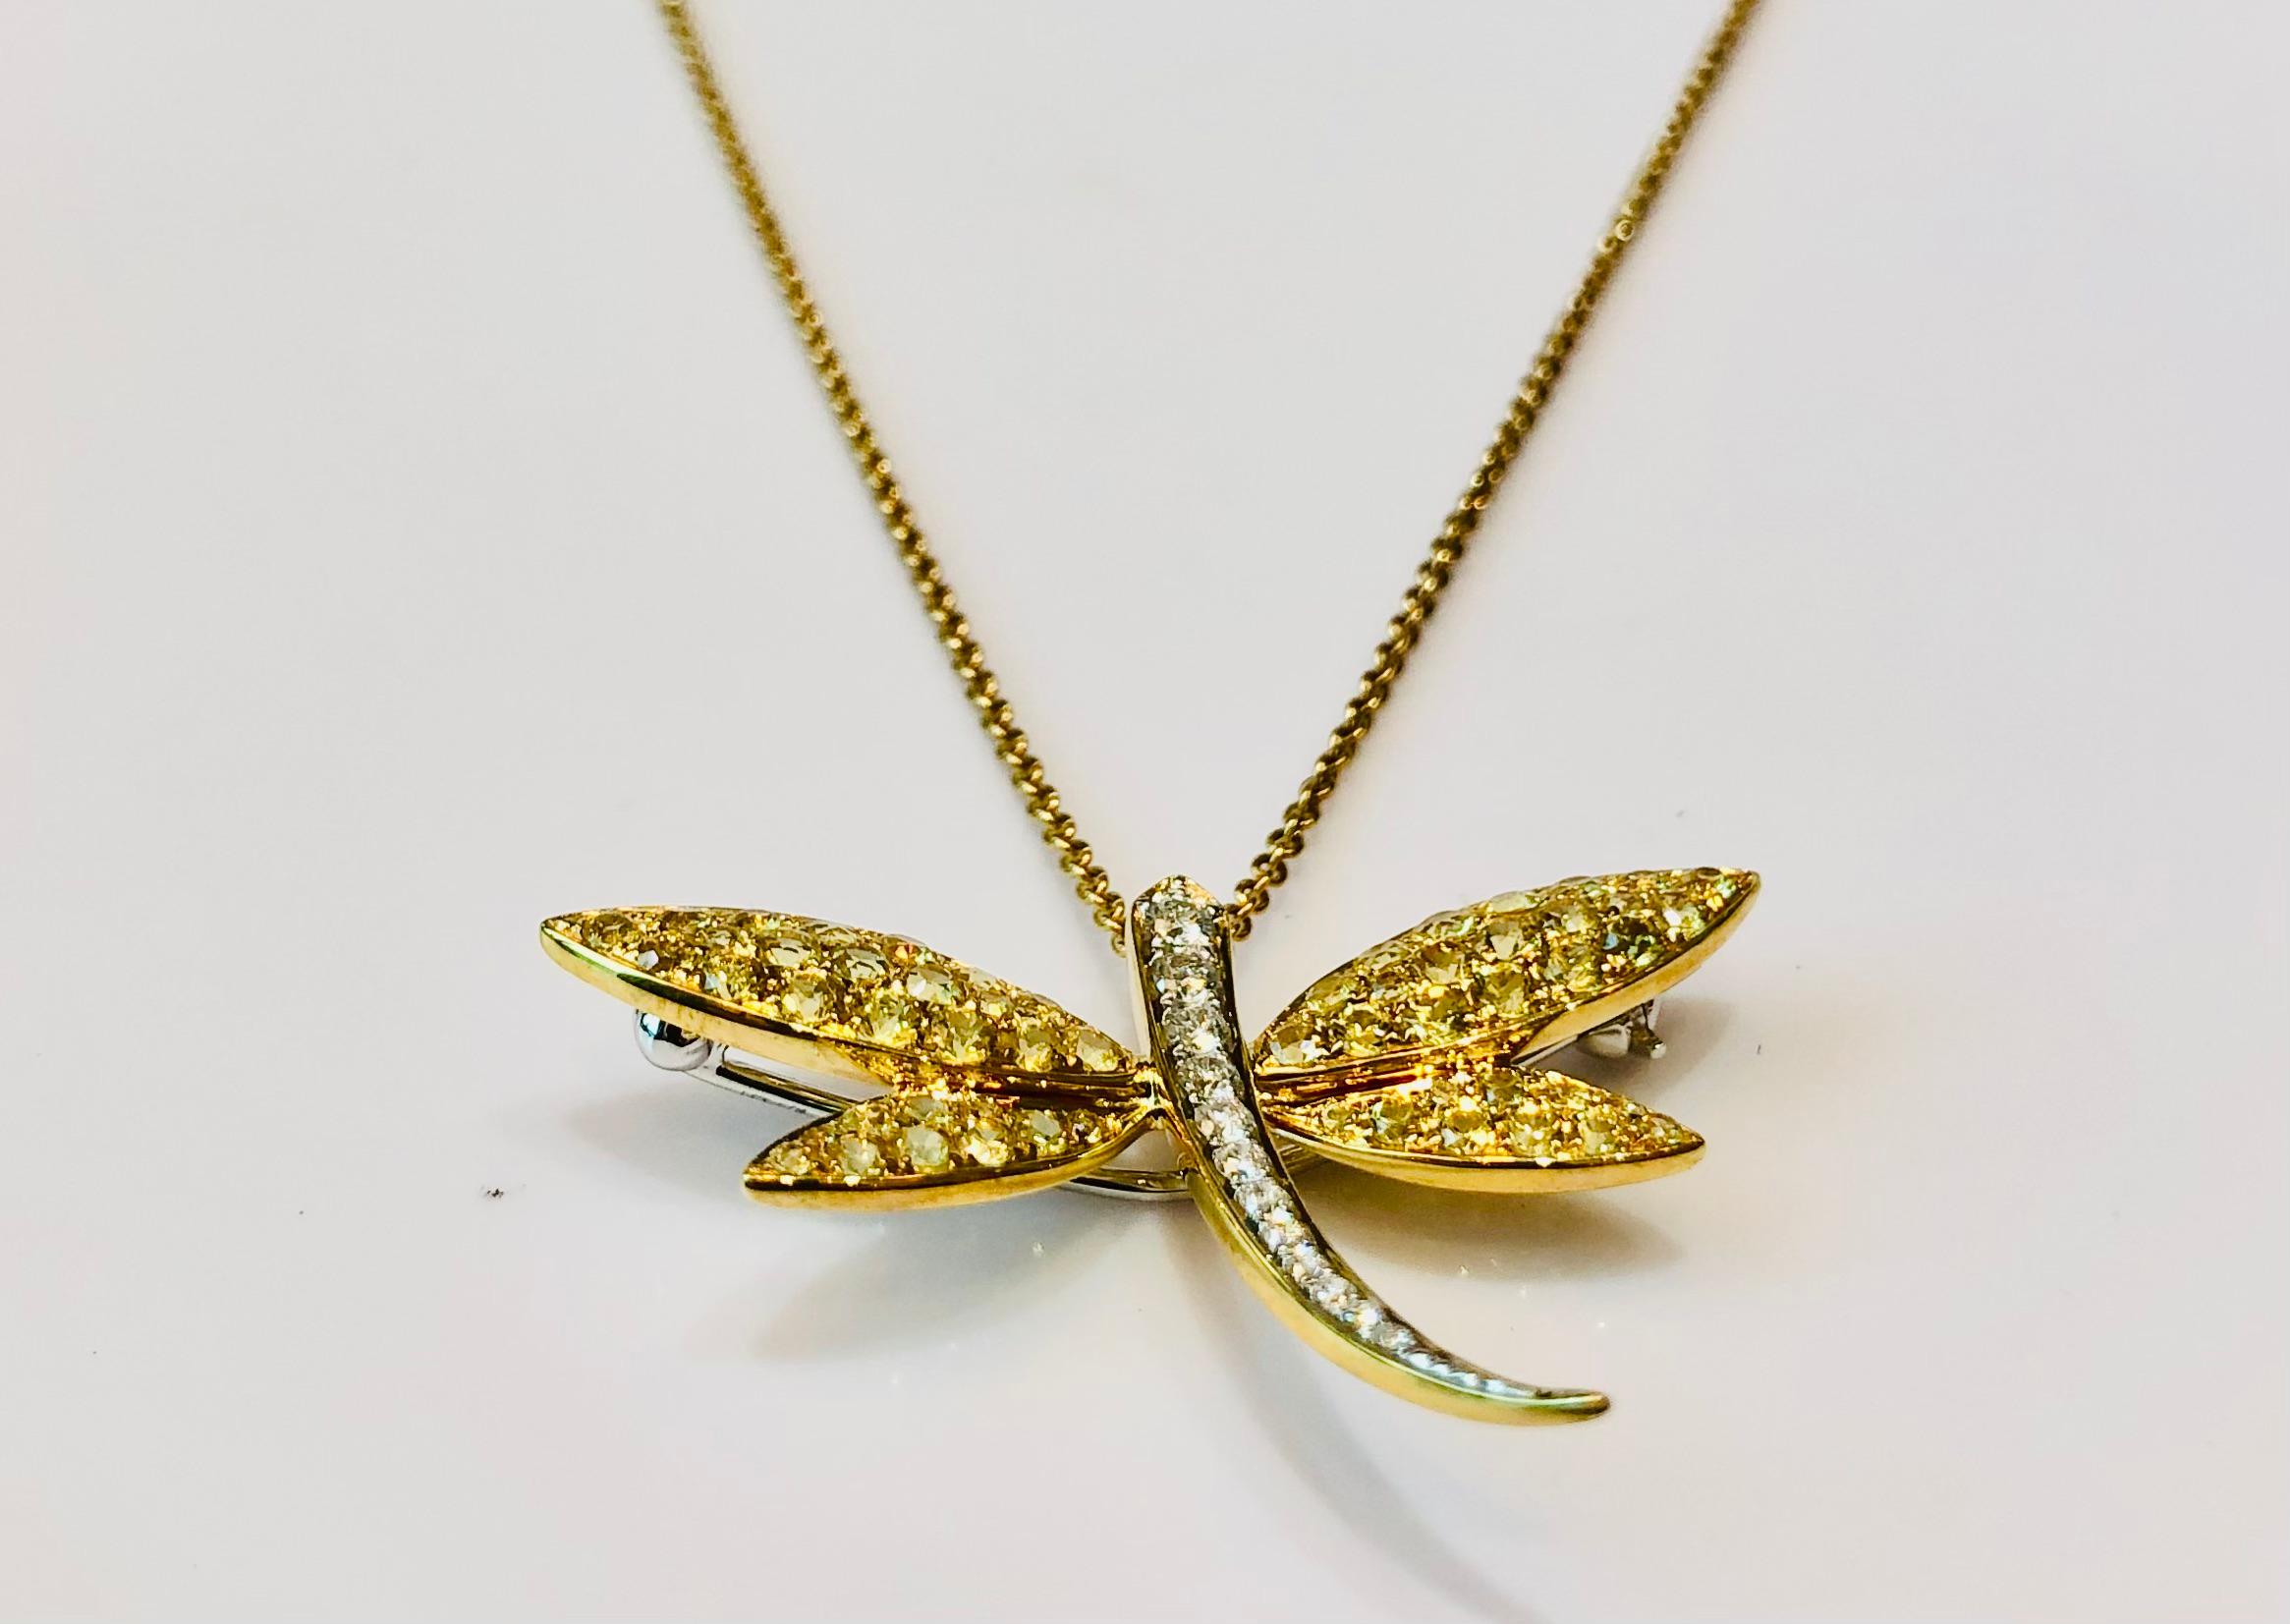 Yellow Saphires and Diamonds Dragonfly Pendant Brooche Necklace in 18k gold
Sapphires 45 brilliant cut  total 1.01 cts
Diamonds 38 FGVS  brilliant cut 0.45cts 
Gold total 7.05gr
Chain length at 42cm and extra clasp at 38cm

Irama Pradera is a